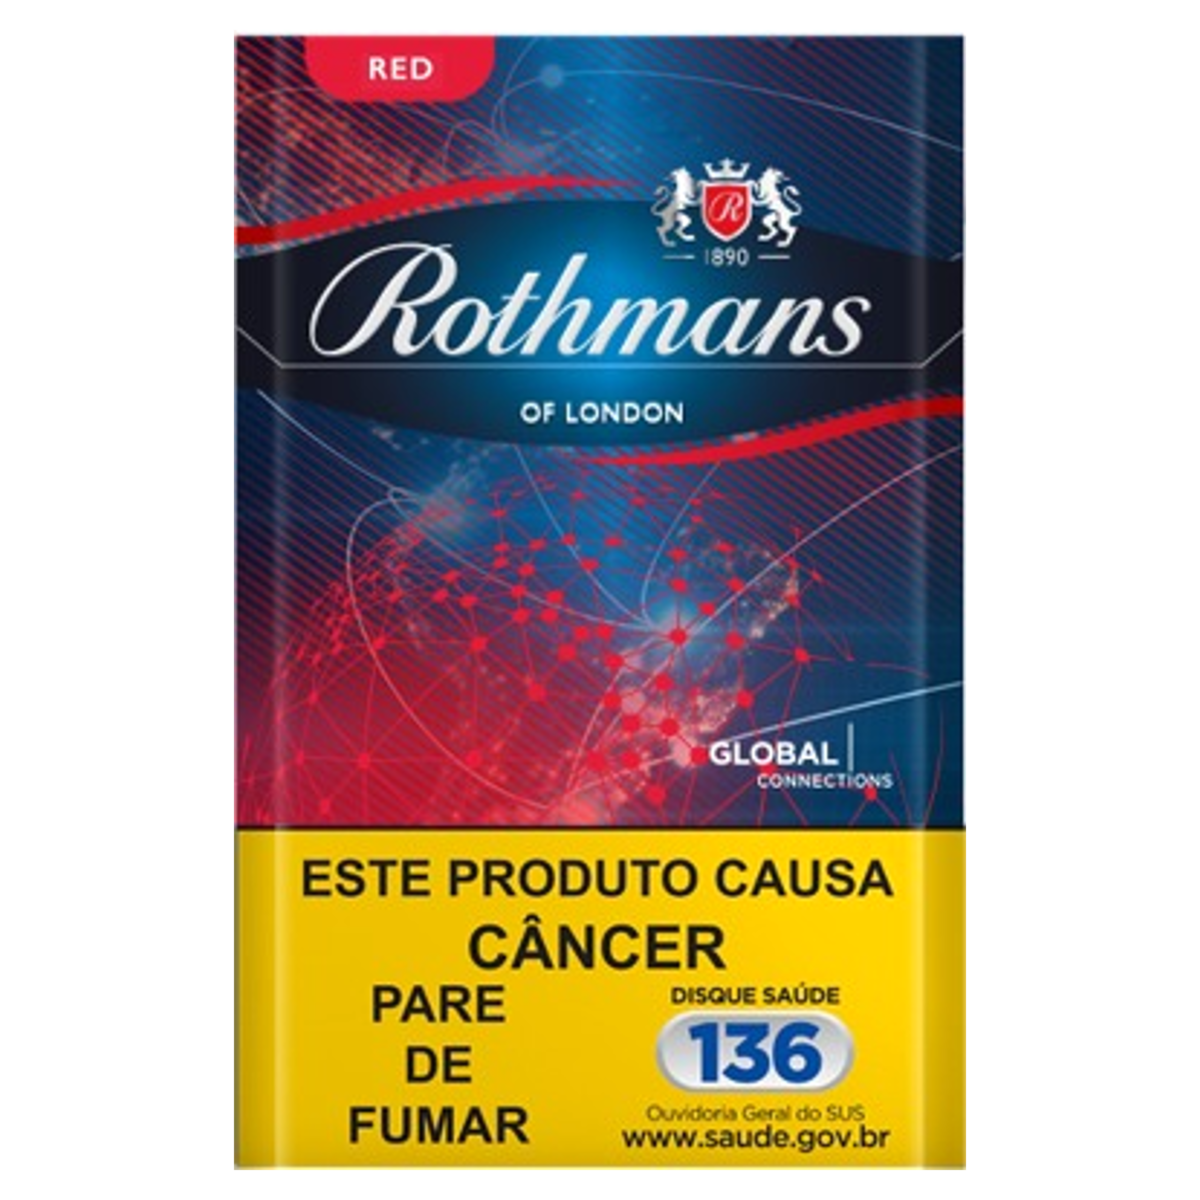 0000078919464 - PACK CIGARRO RED ROTHMANS GLOBAL CONNECTIONS BOX